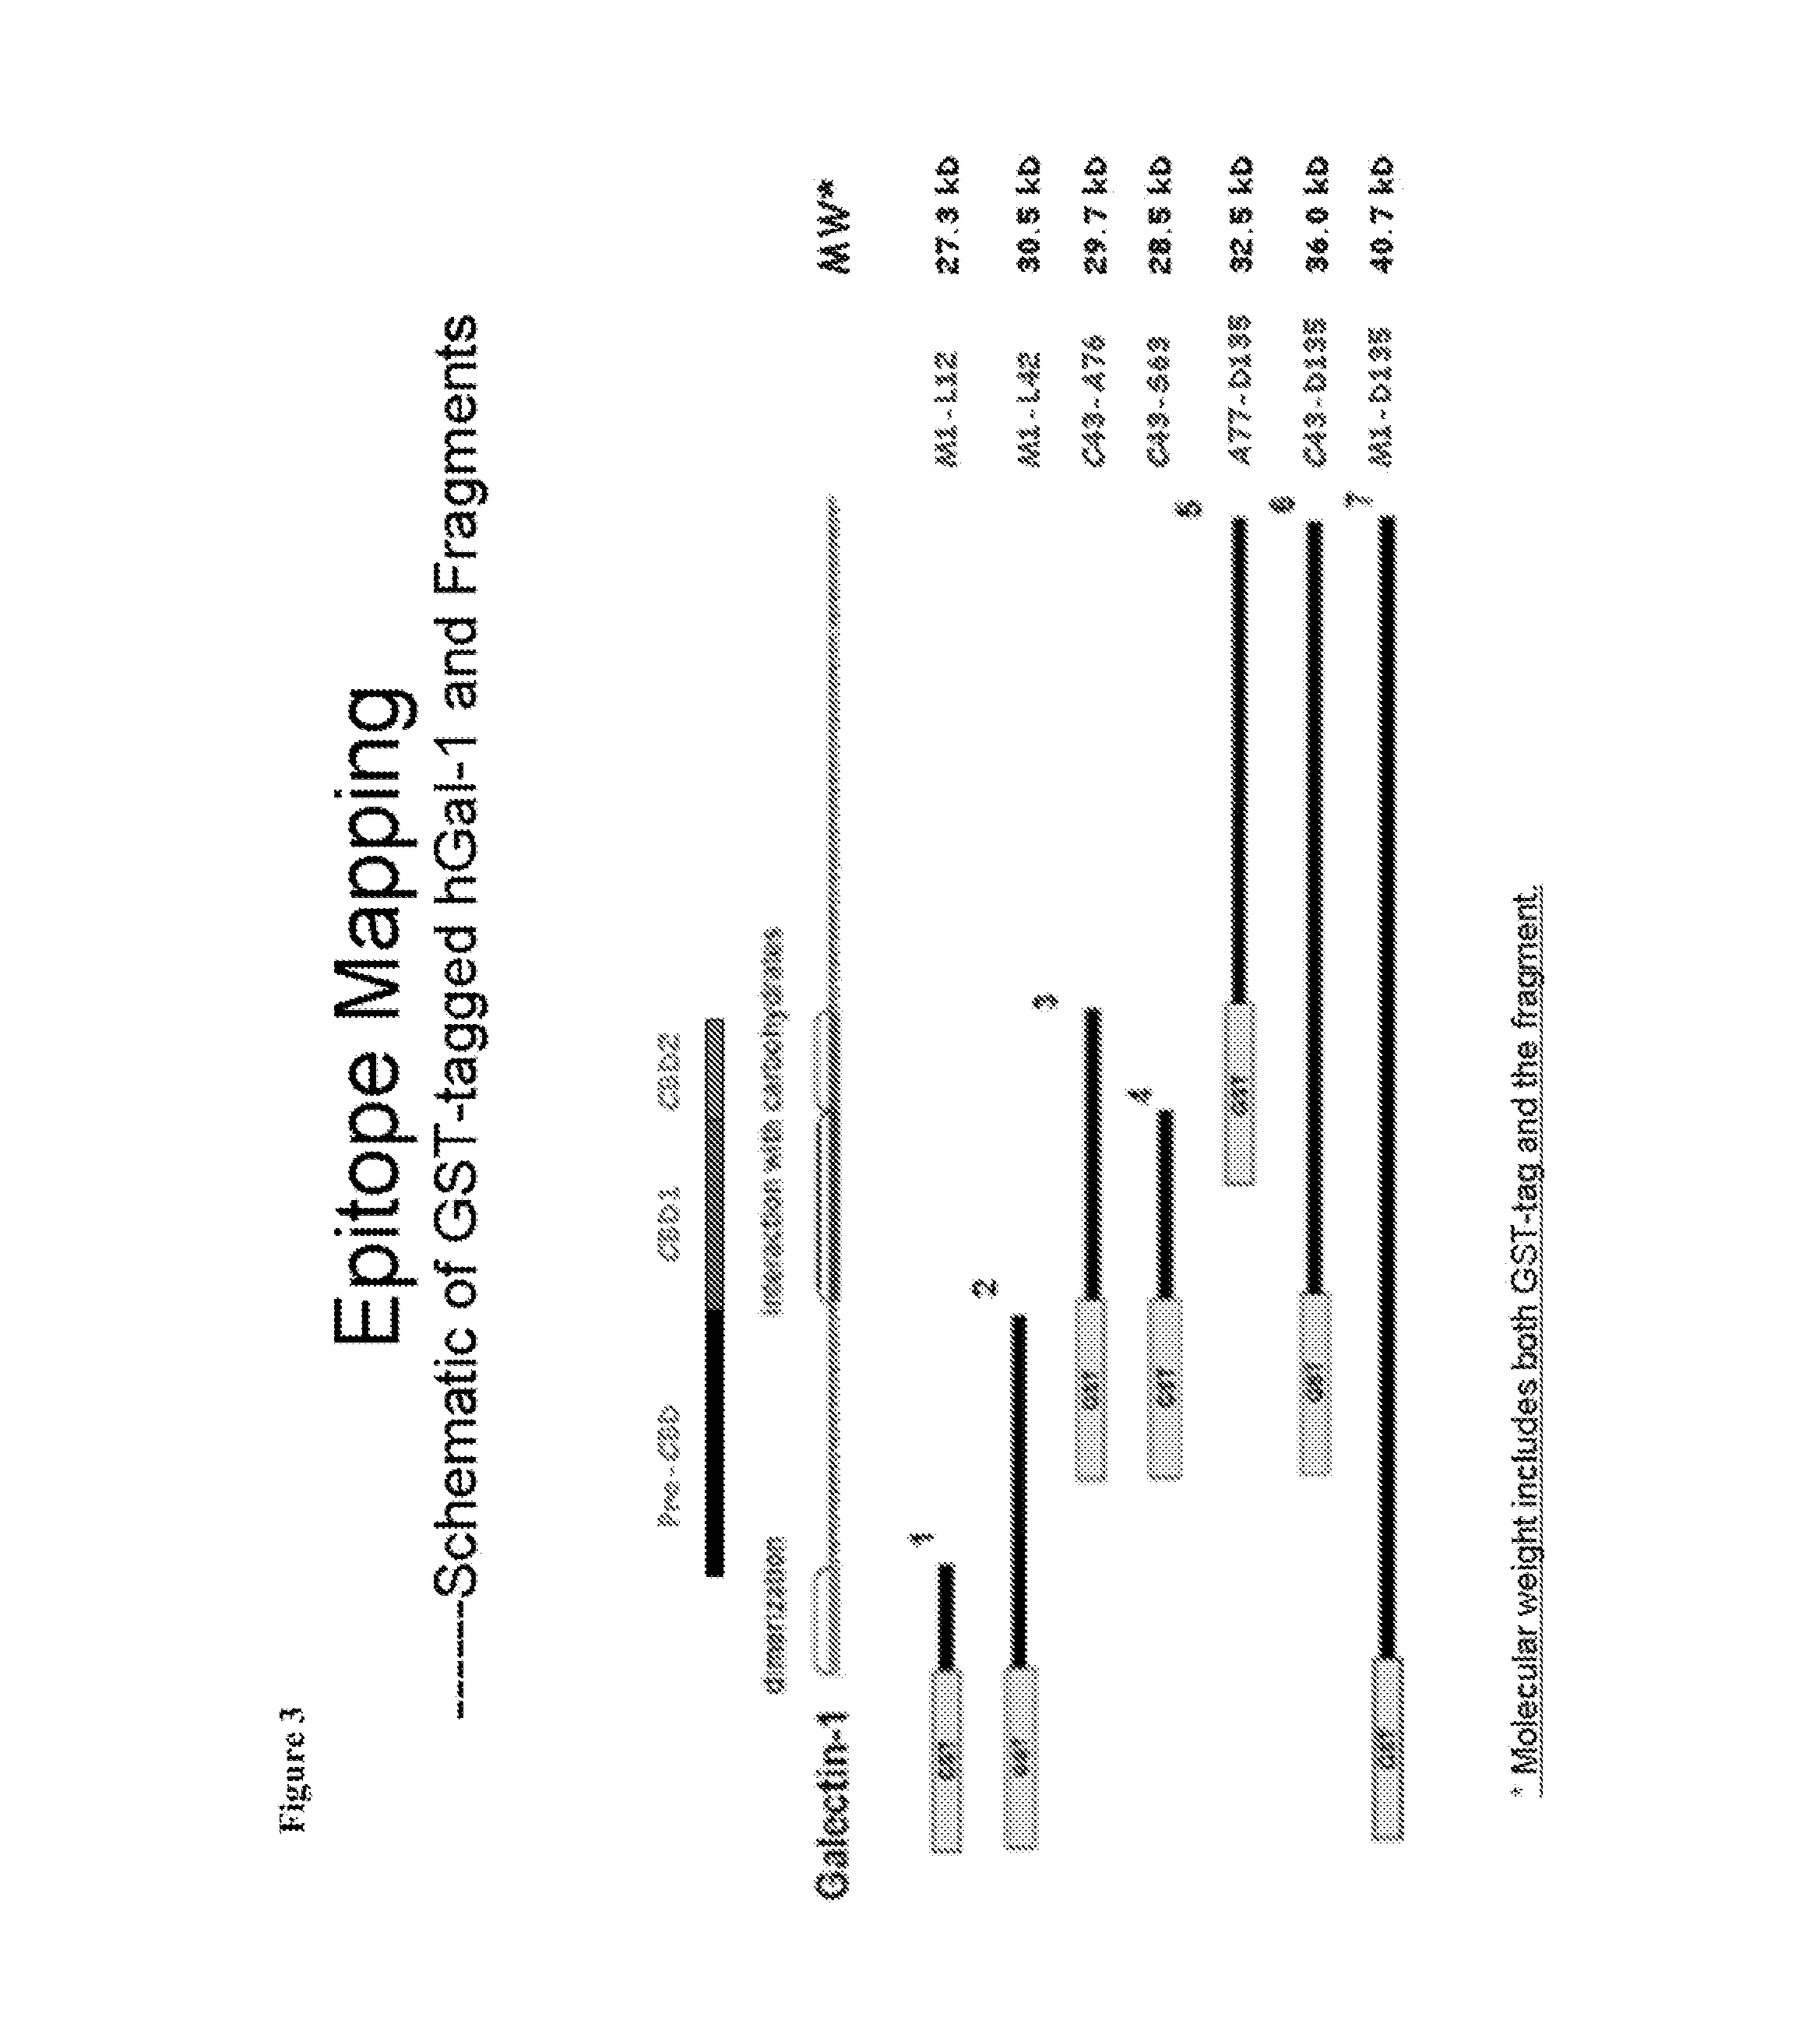 Anti-galectin-1 monoclonal antibodies and fragments thereof